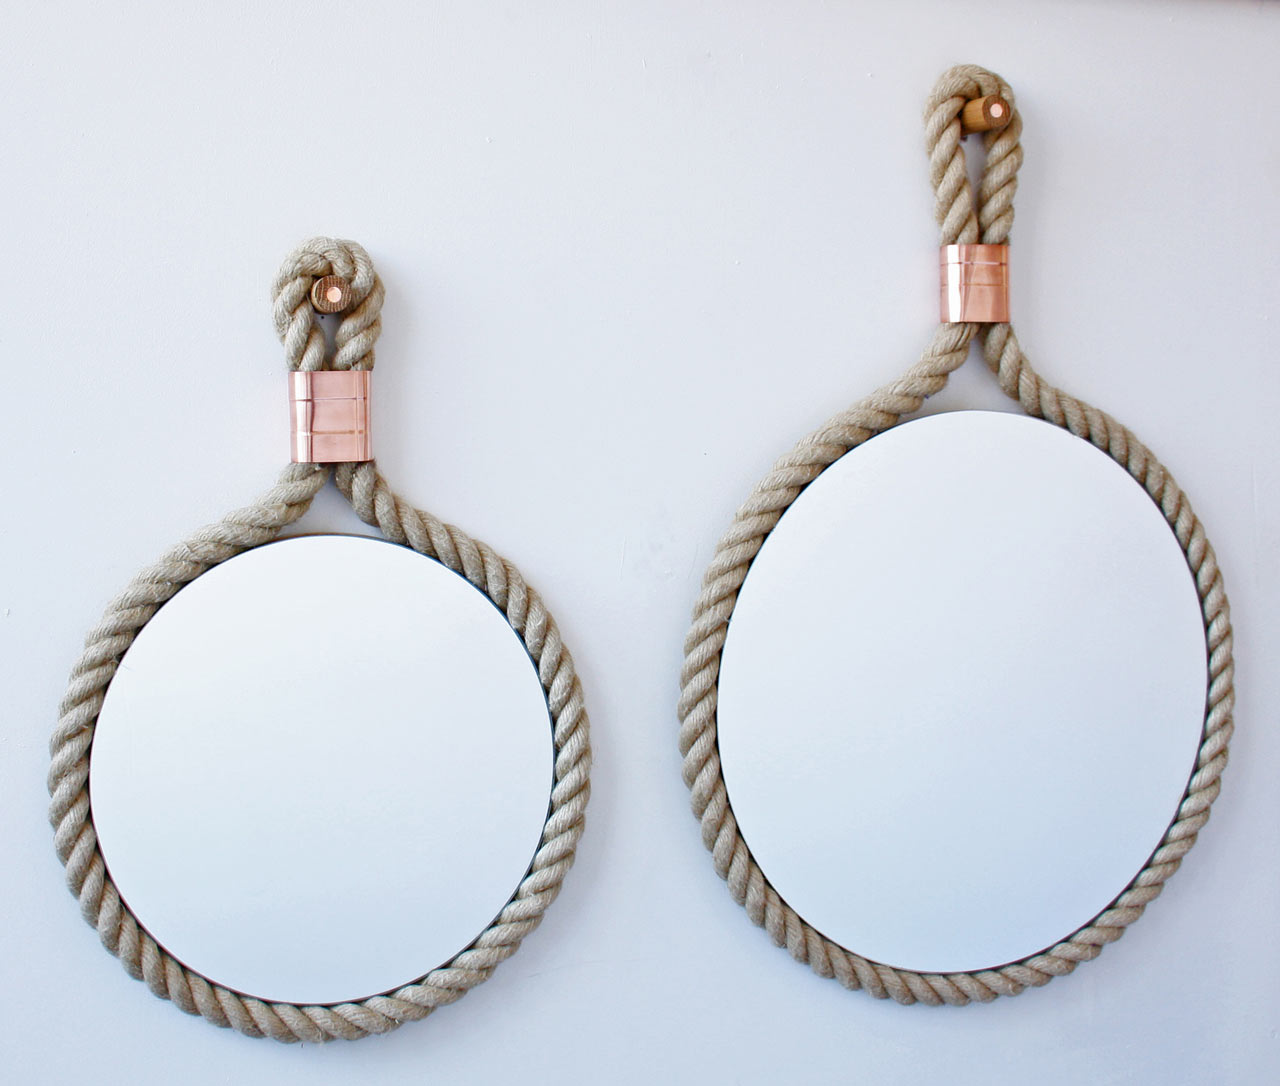 Copper & Rope: CR Mirrors by Miles Dexter